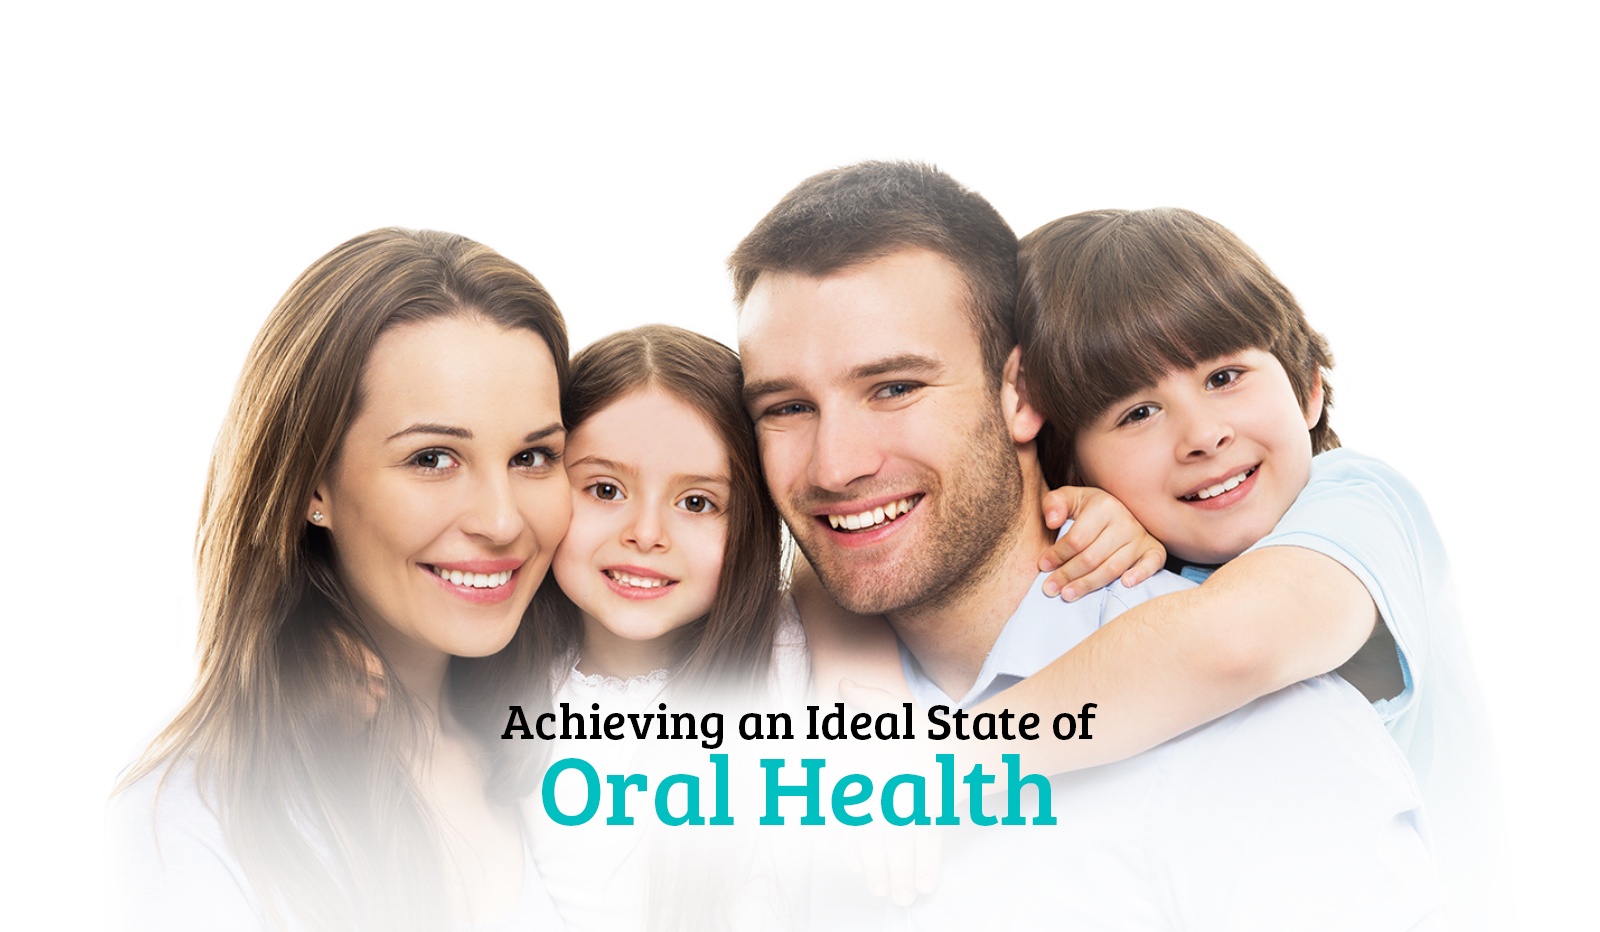 Achieving an Ideal State of Oral Health - Emergency Dental Services Toronto